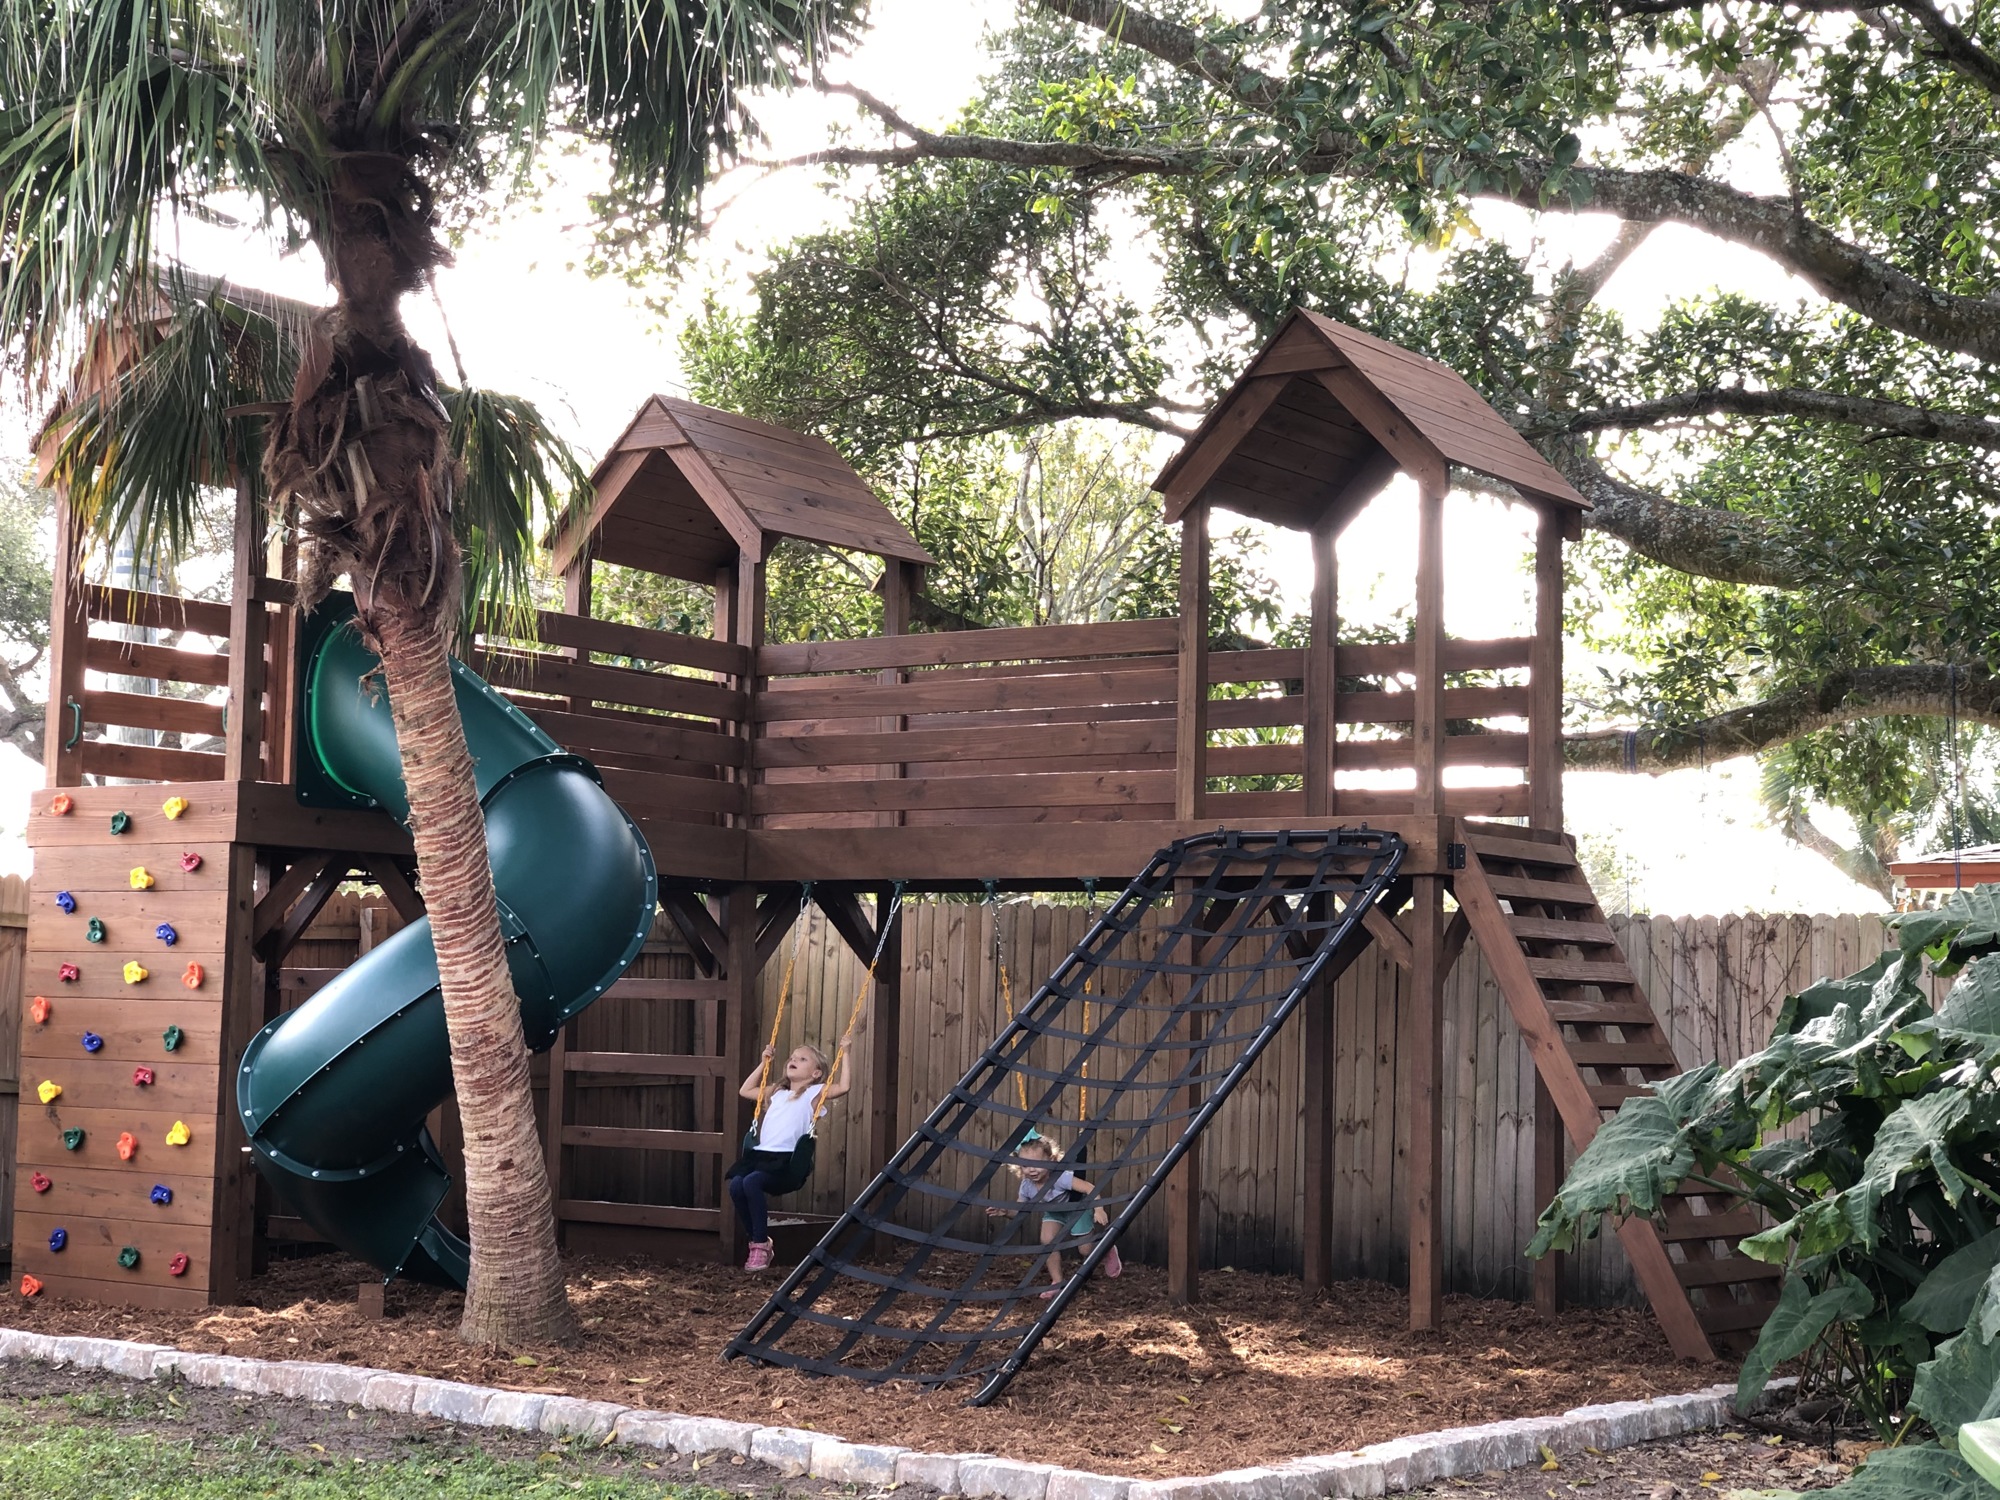 Lindsay and Bobby Sweeting built a new playground for their children to enjoy. Courtesy photo.